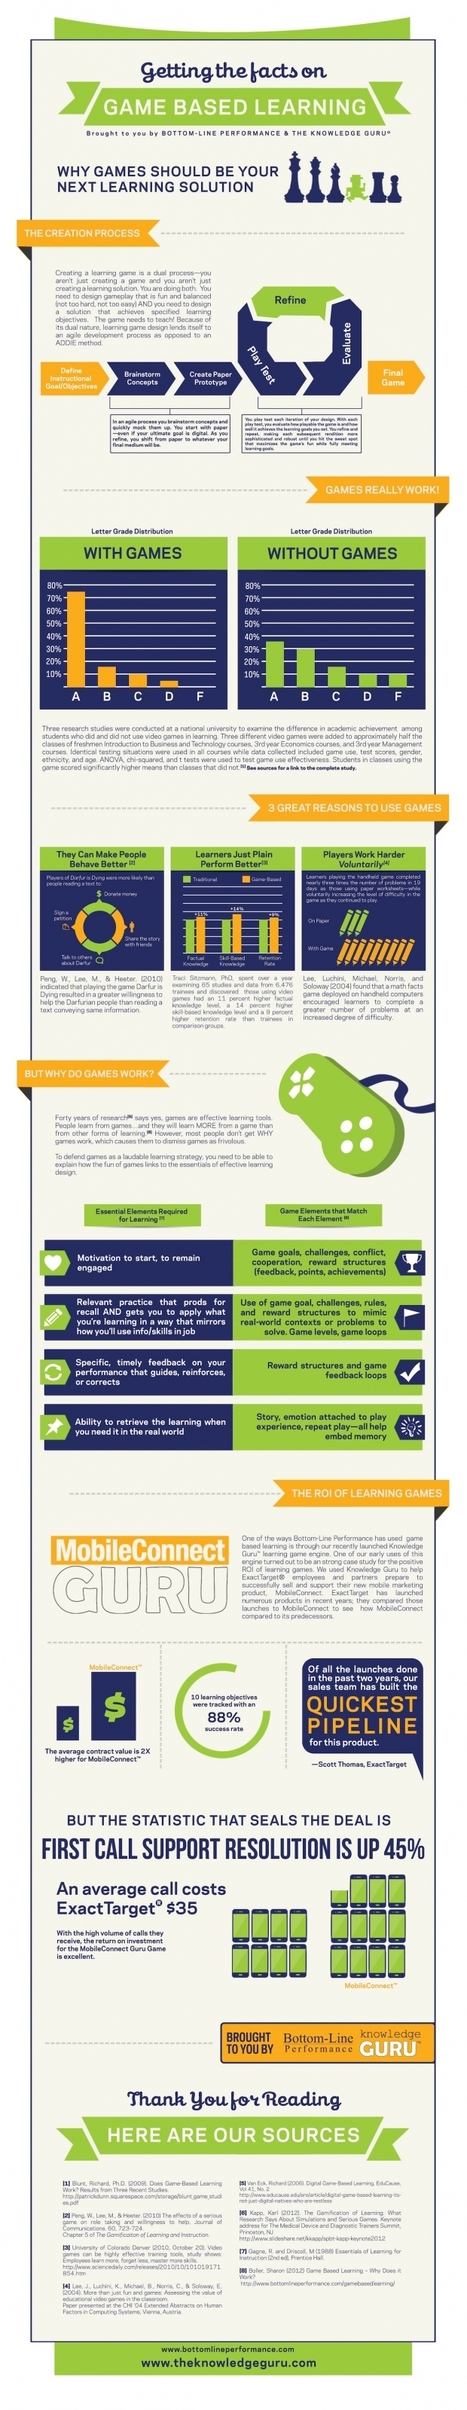 Getting the Facts on Game Based Learning [Infographic] | 21st Century Learning and Teaching | Scoop.it